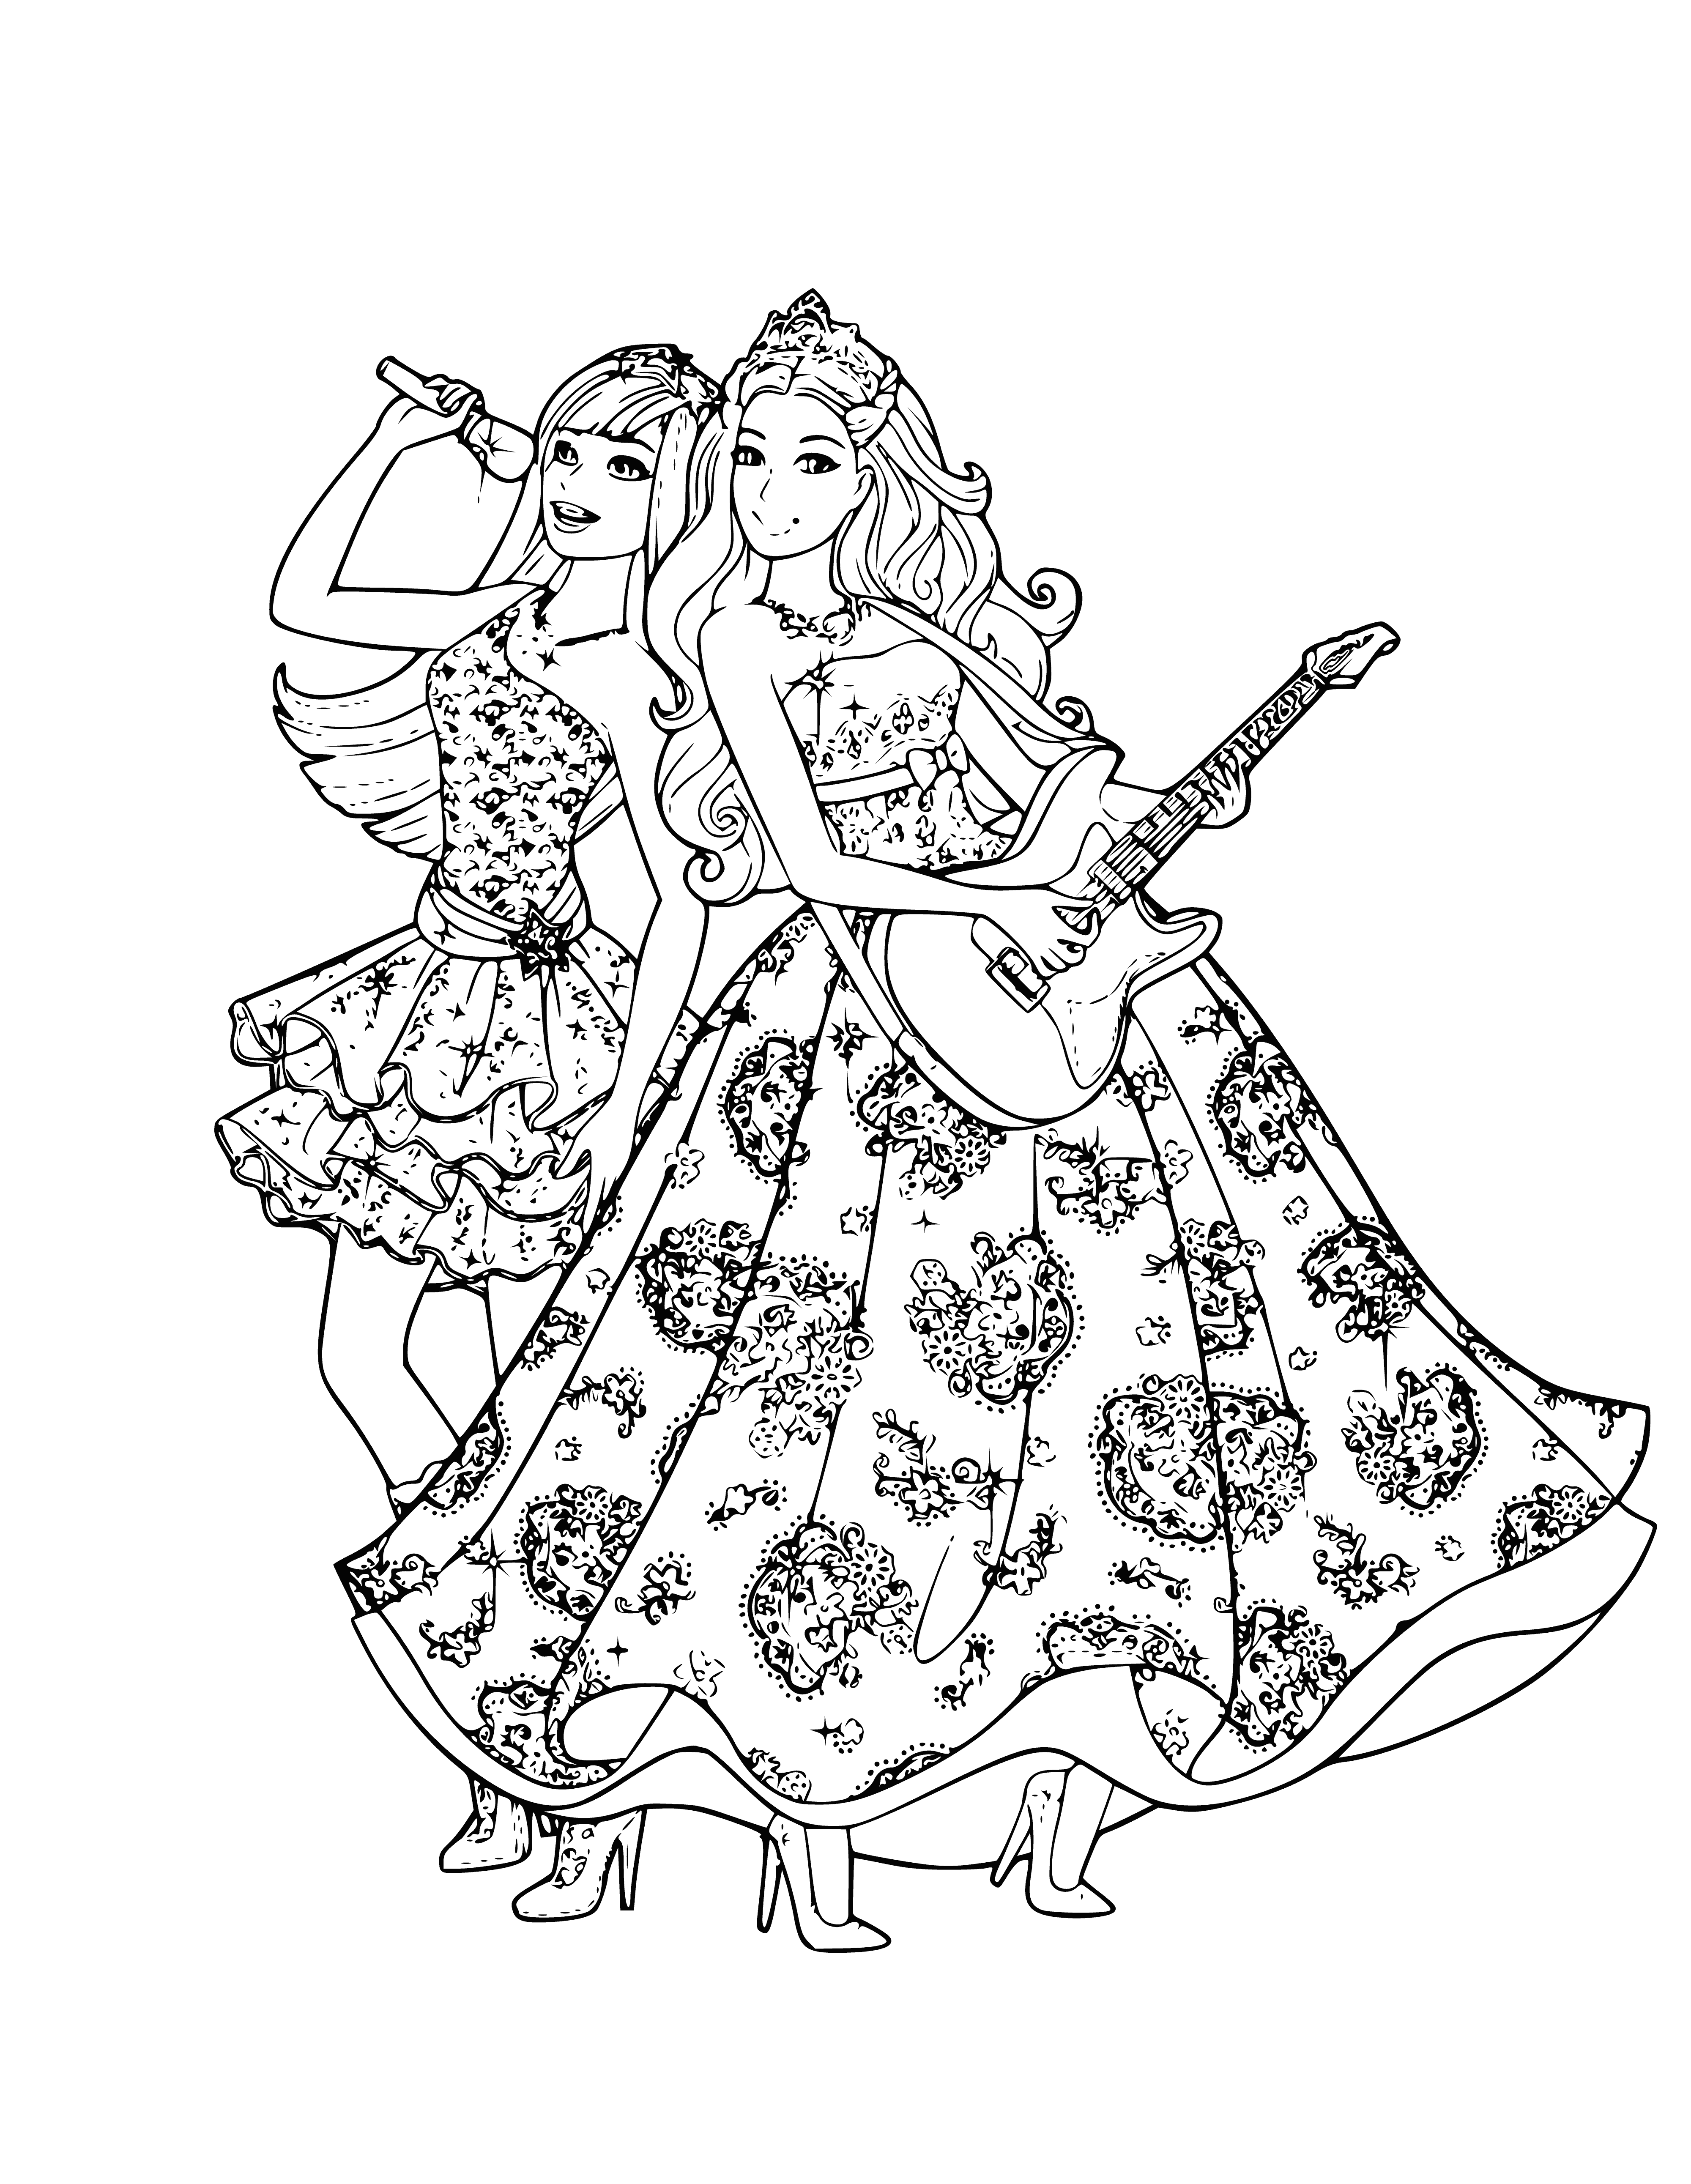 coloring page: Barbie singing proudly into a mic in a sparkly pink dress, curled & styled blonde hair, high heels. #GirlPower #Singing